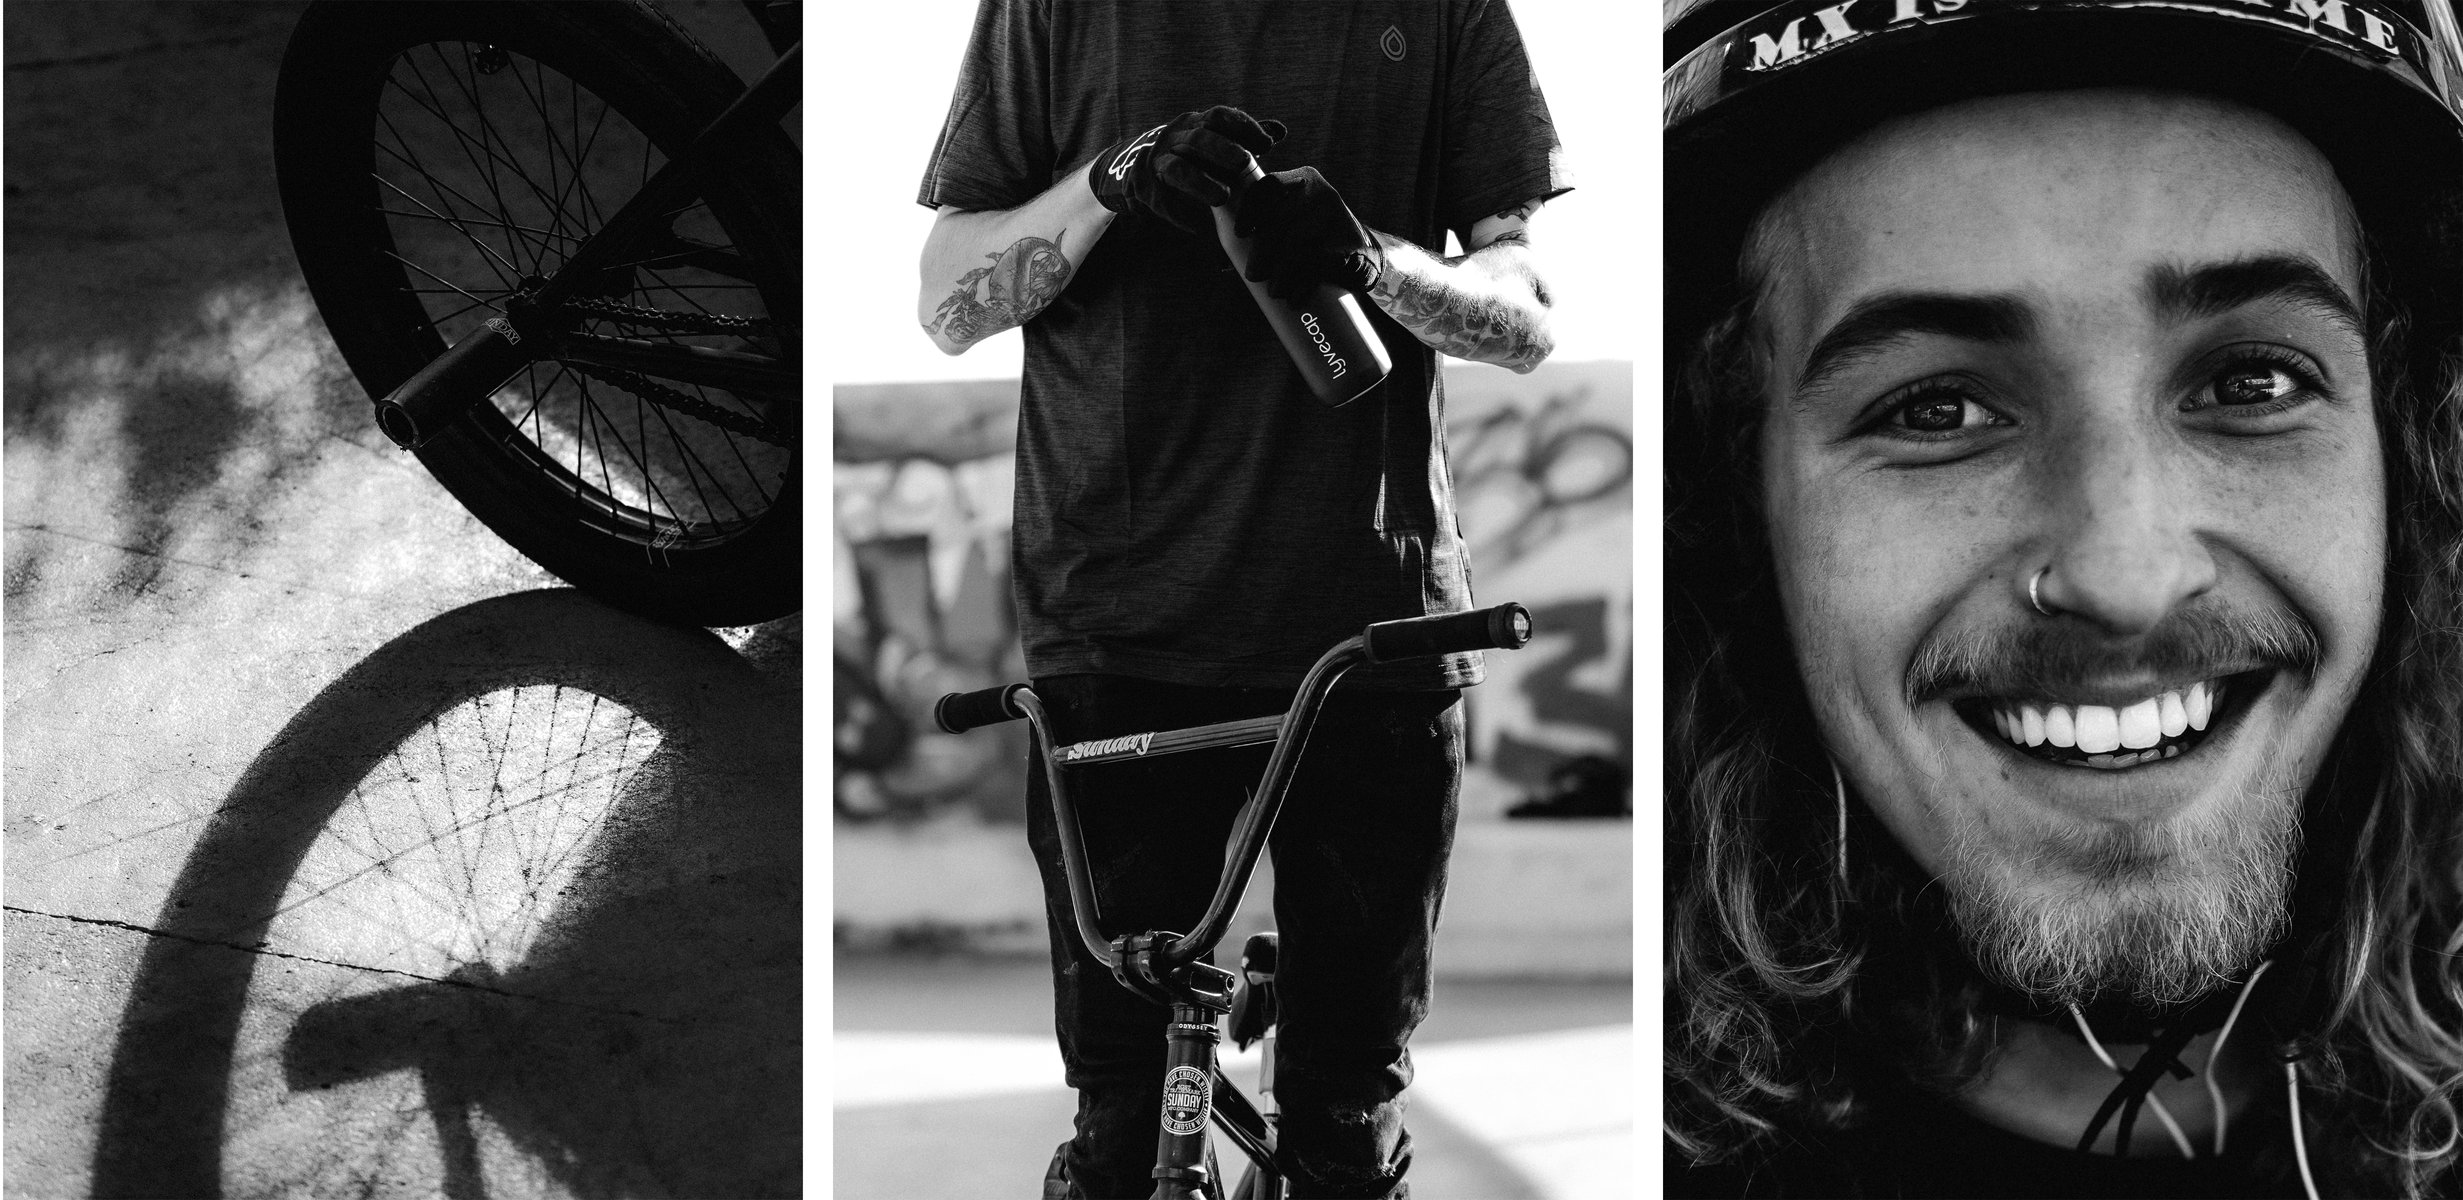  Triptych:

Left image: a black and white image of a bmx tire with pegs, casting a hard shadow onto the sidewalk.

Center image: a black and white image of a tattooed biker standing over his bike and opening a black water bottle.

Right image: a close-up image of Jack Shipley, wearing a helmet and smiling into the camera. by Sydney SG